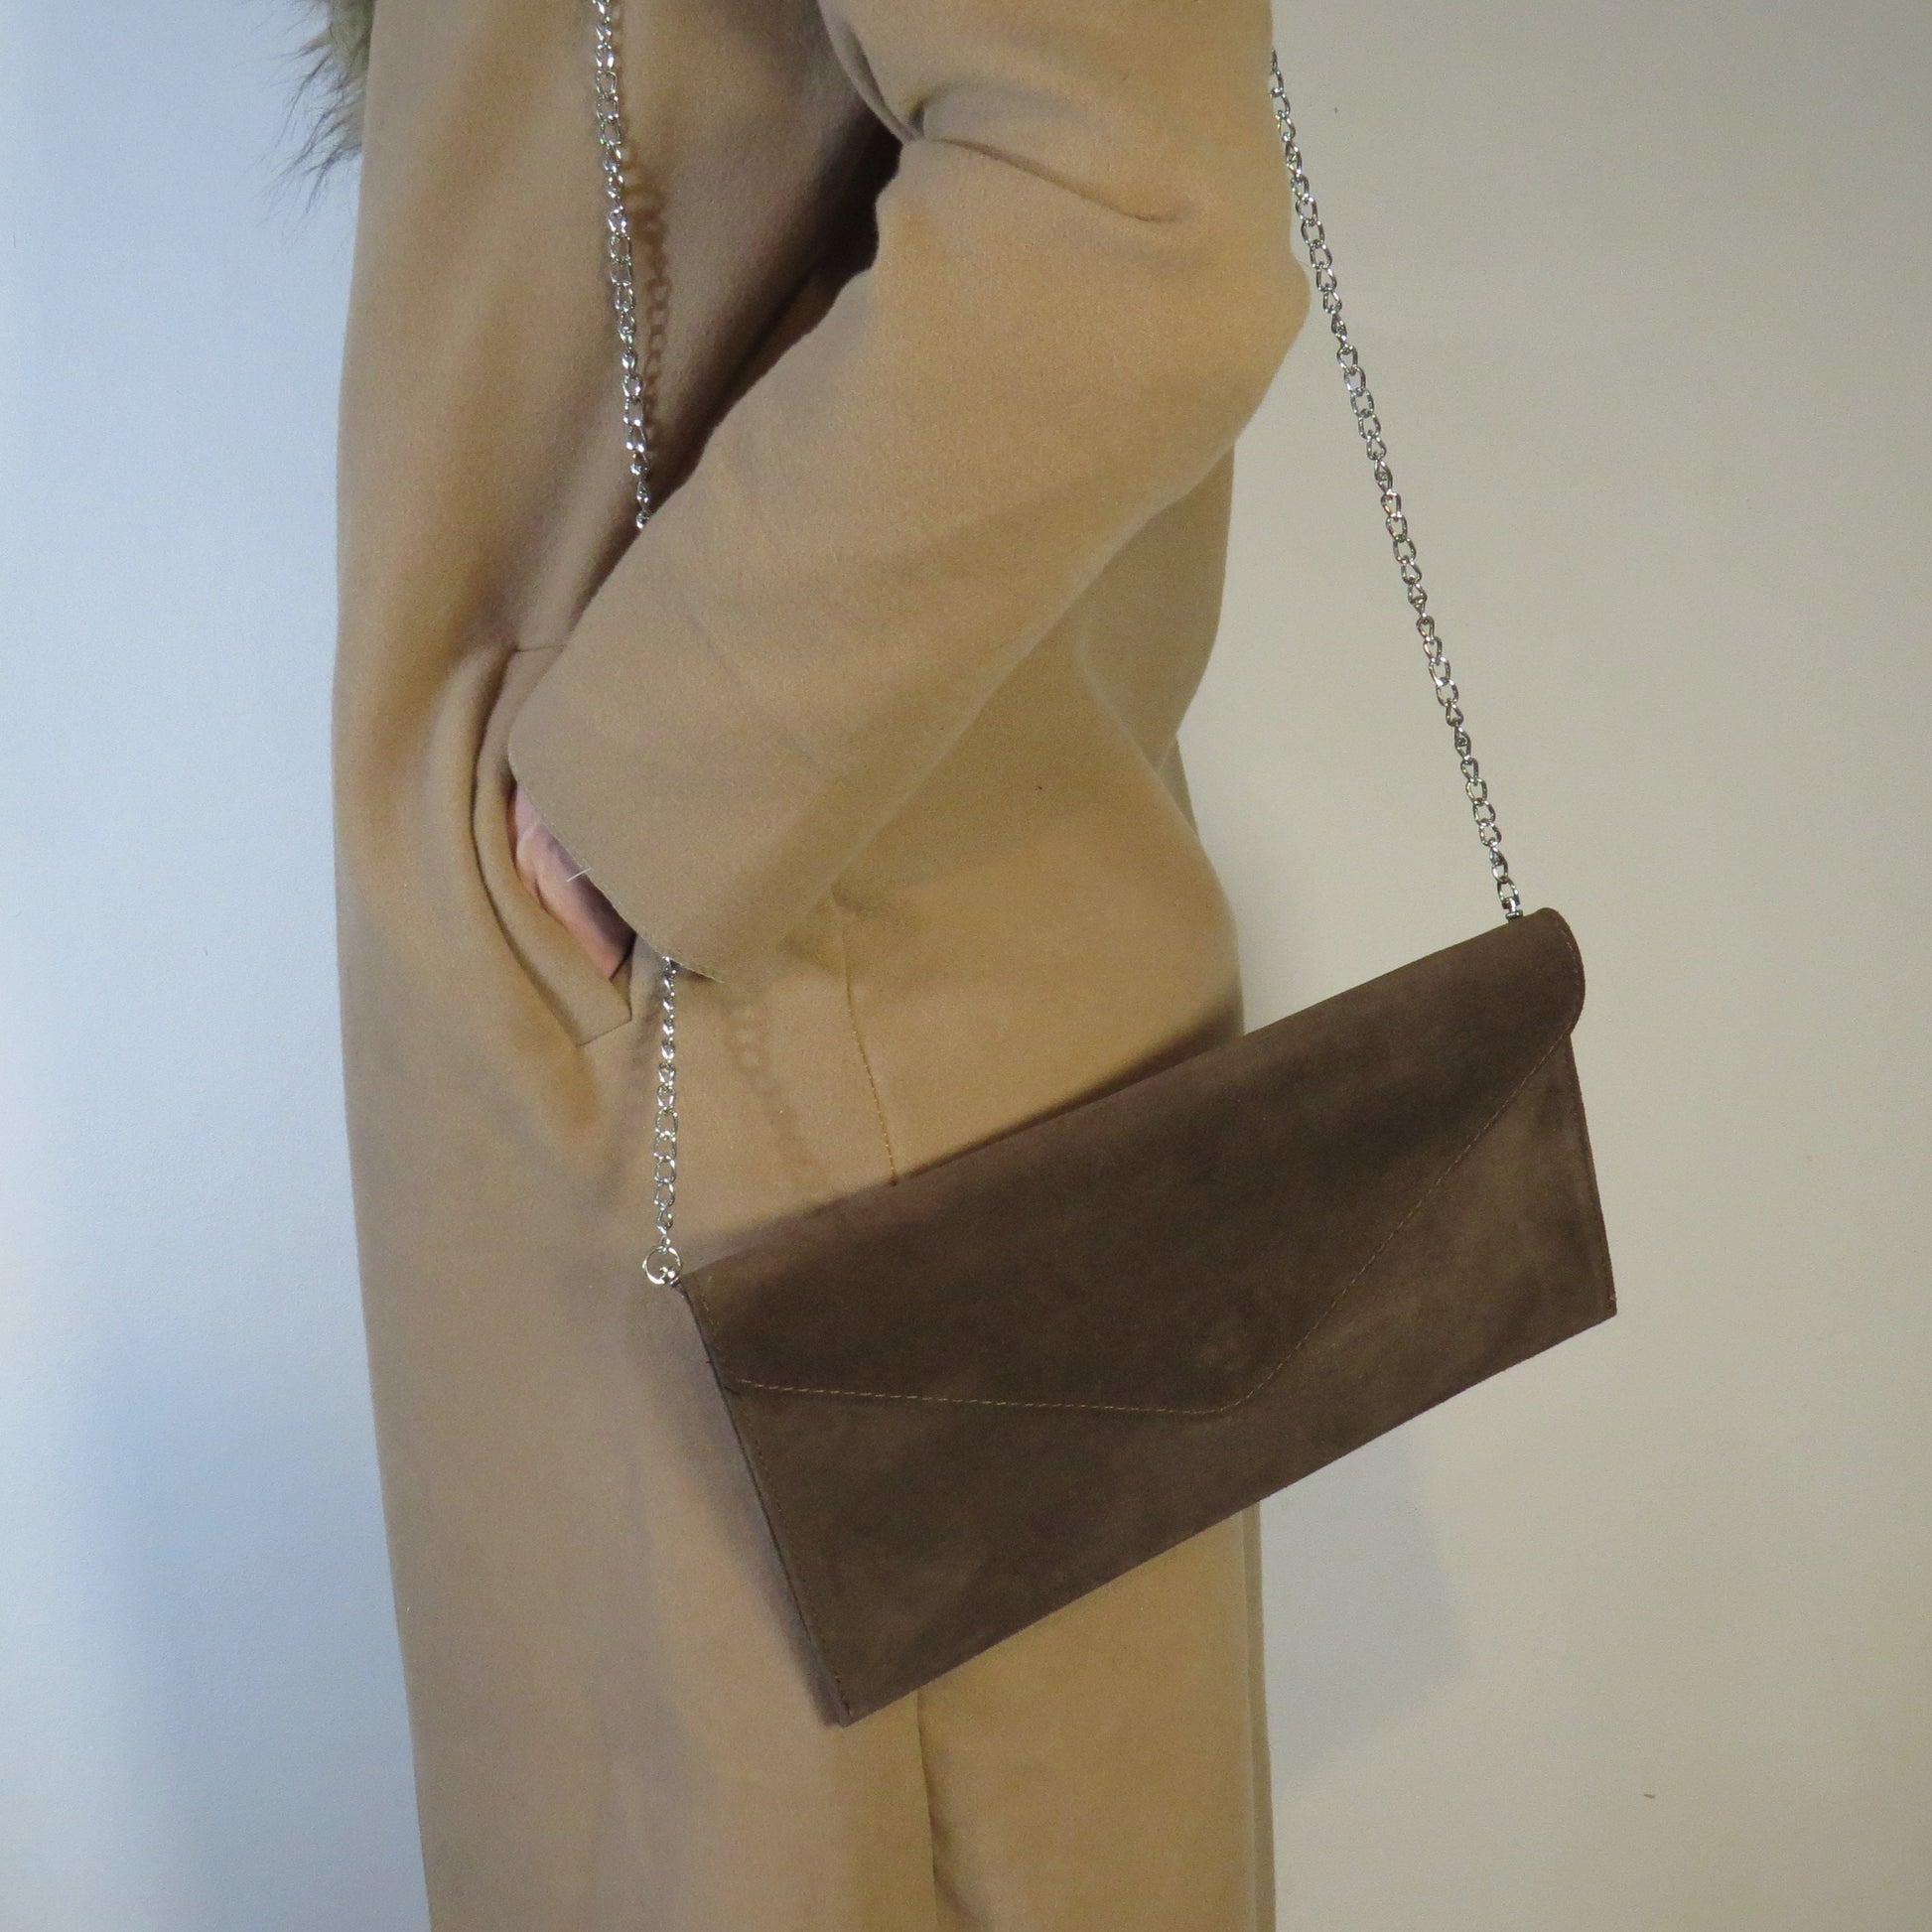 Brown envelope clutch bag with chain strap